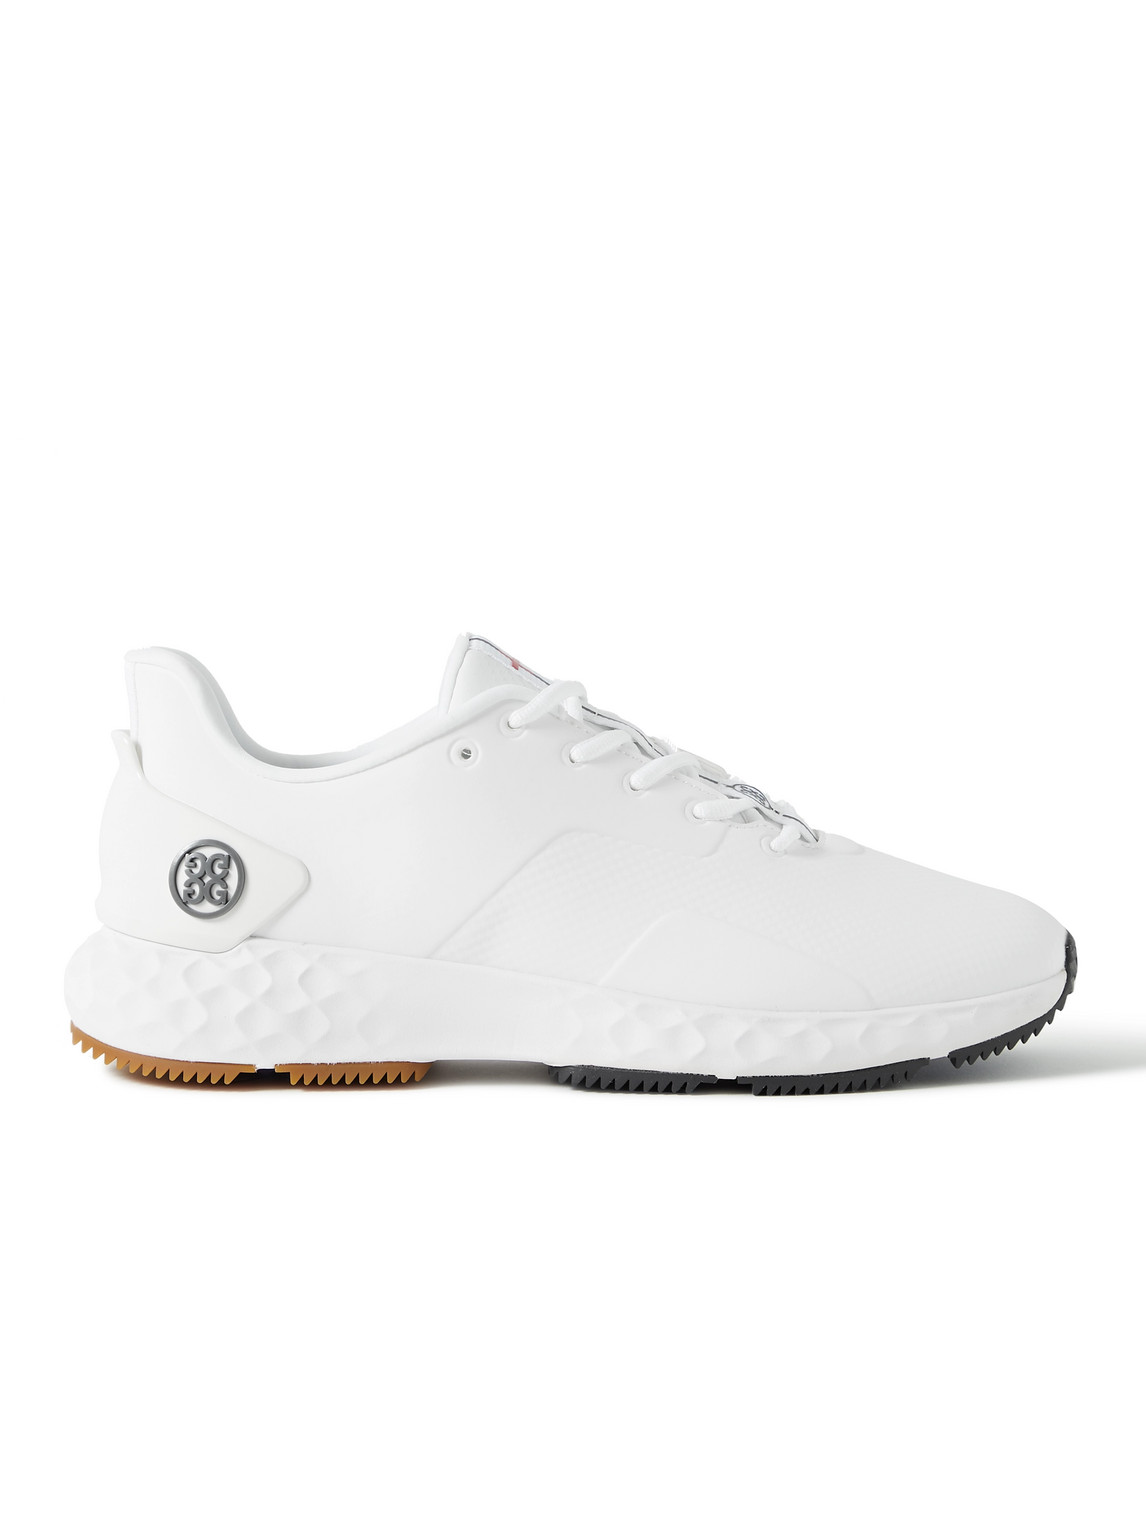 MG4 Rubber-Trimmed Coated-Mesh Golf Shoes